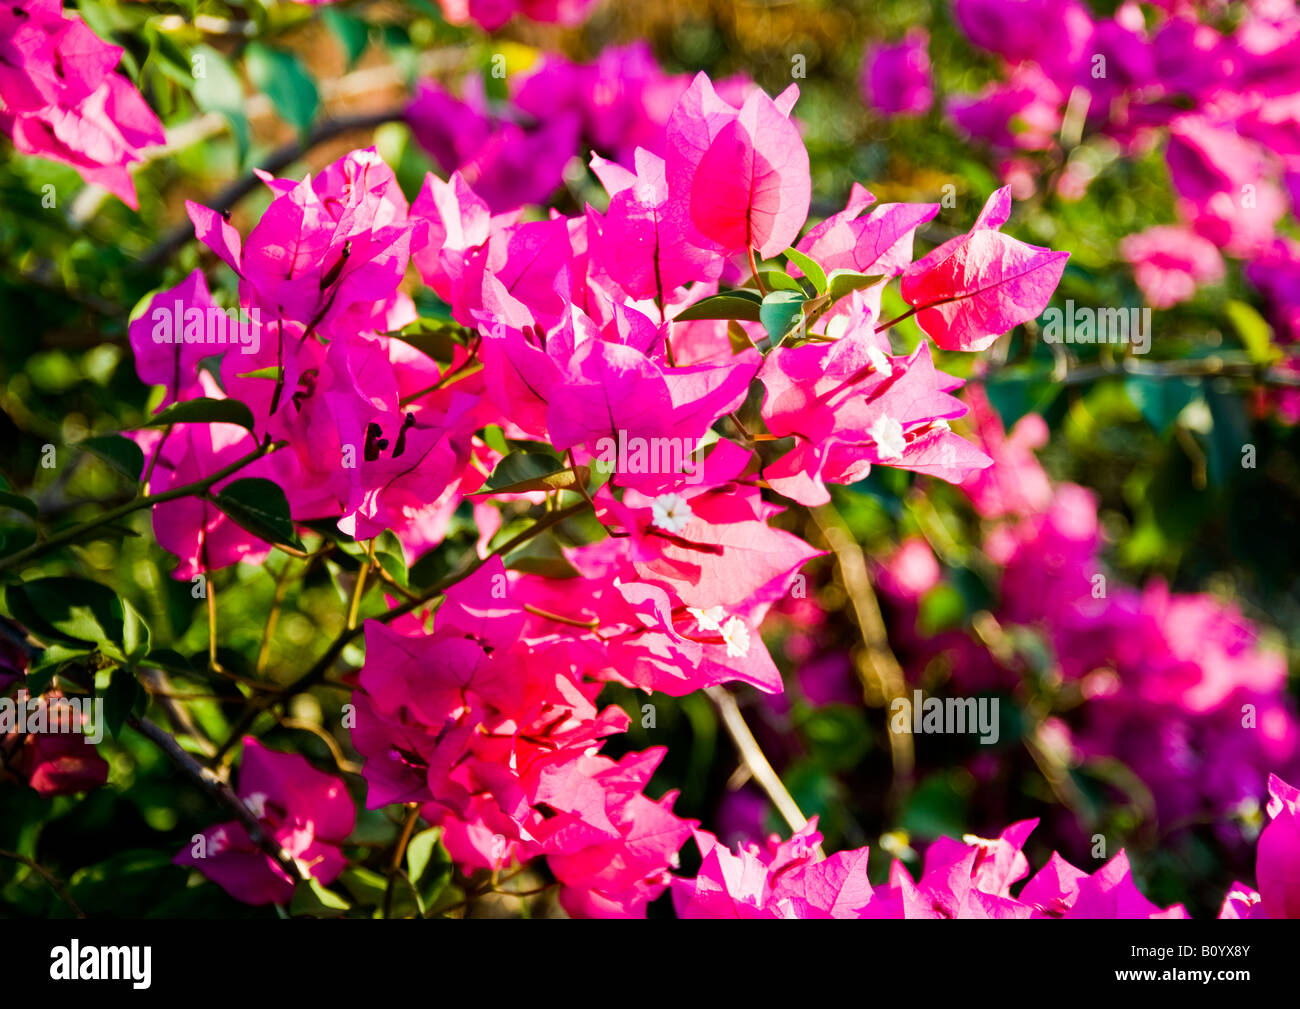 Bougainvilla plant in full bloom with glowing magenta-red flowers in open sunshine thrive in tropical environmental conditions. Stock Photo